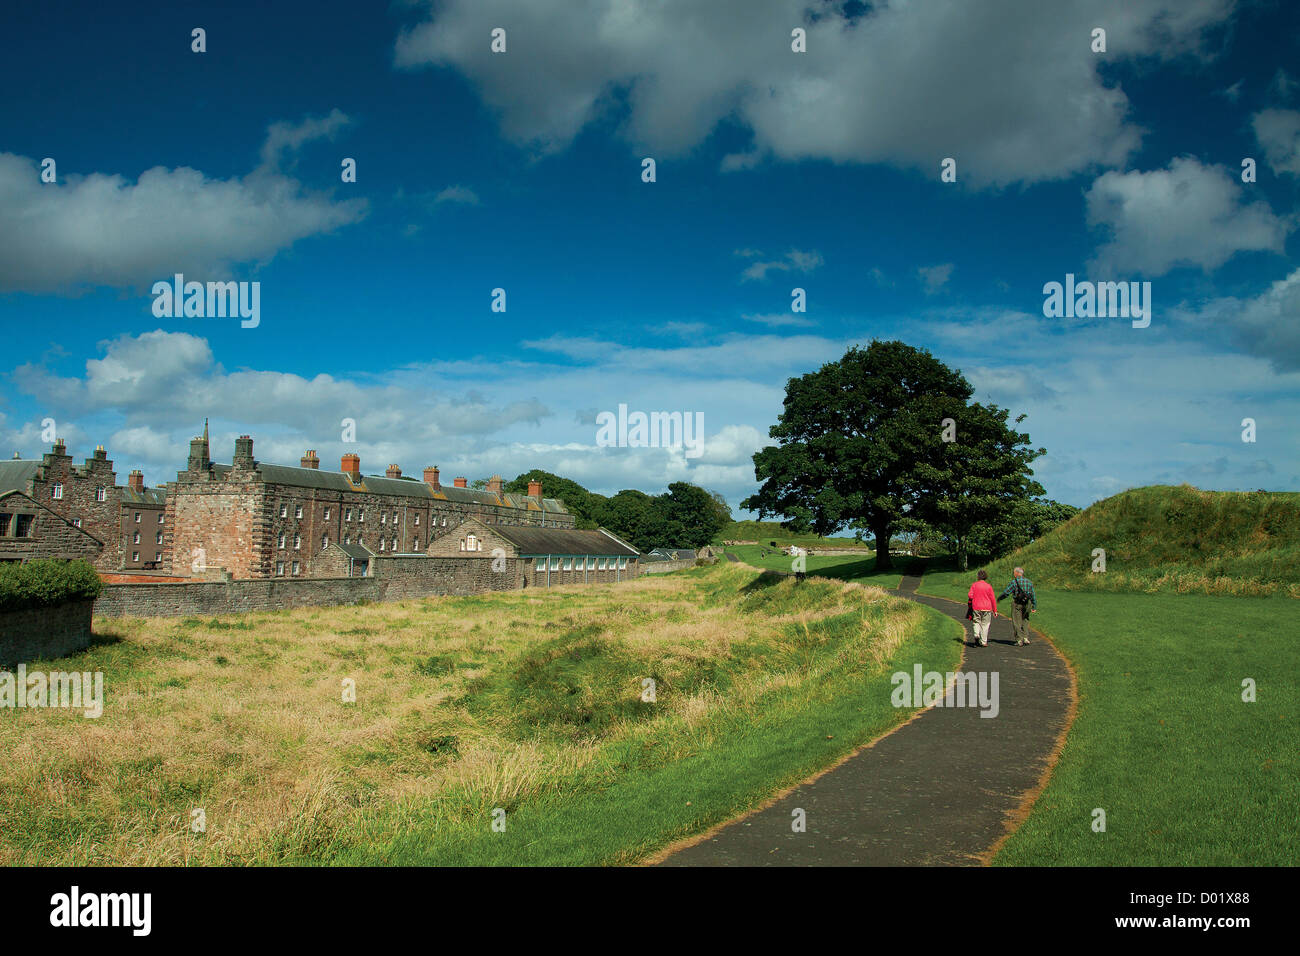 The historic Town Walls of Berwick-upon-Tweed and The Barracks, Northumberland Stock Photo